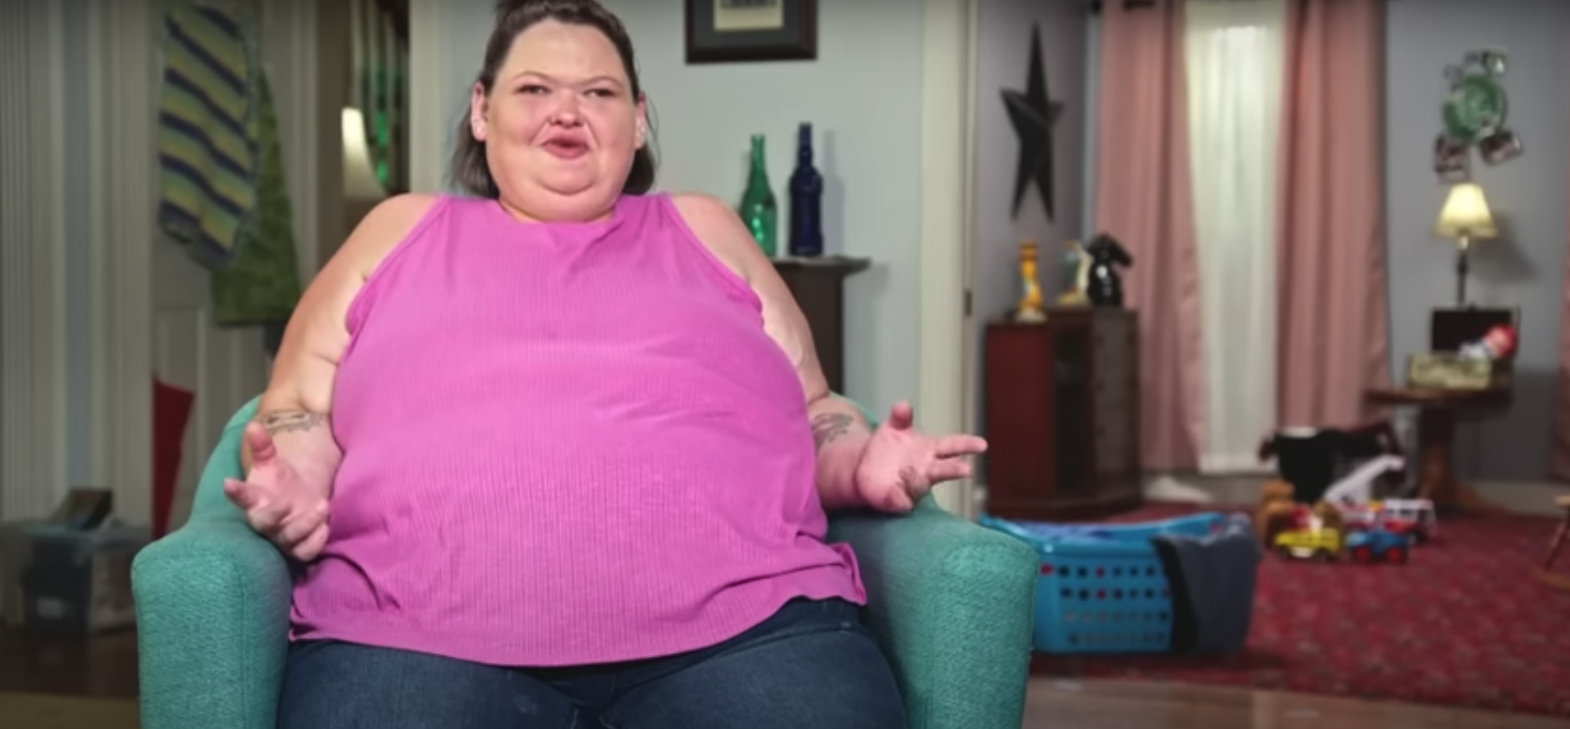 Amy Slaton of '1000-lb Sisters' wearing a pink top